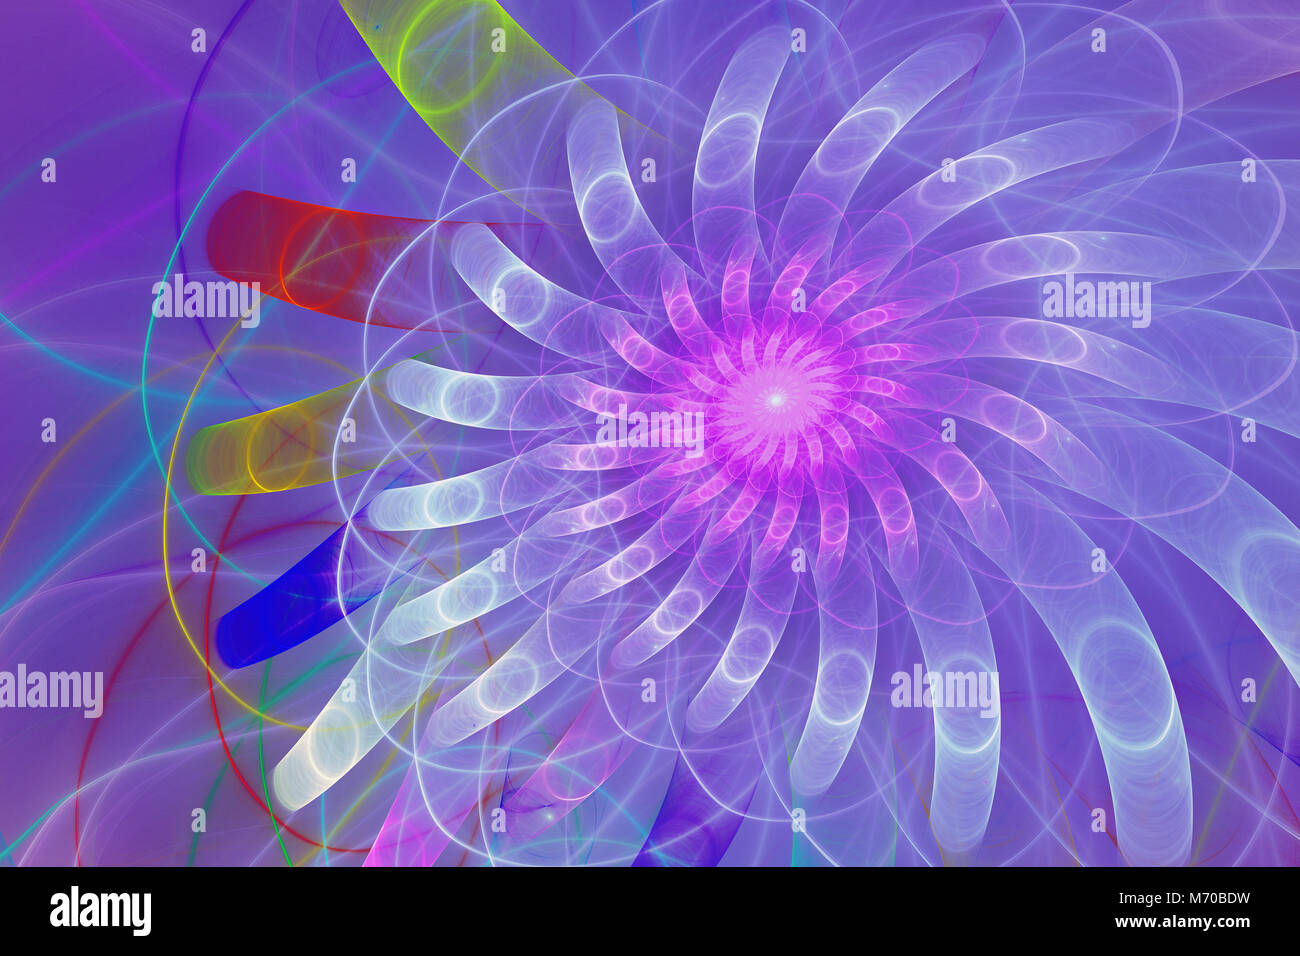 Fractal flower in gradient pink and purple Stock Photo